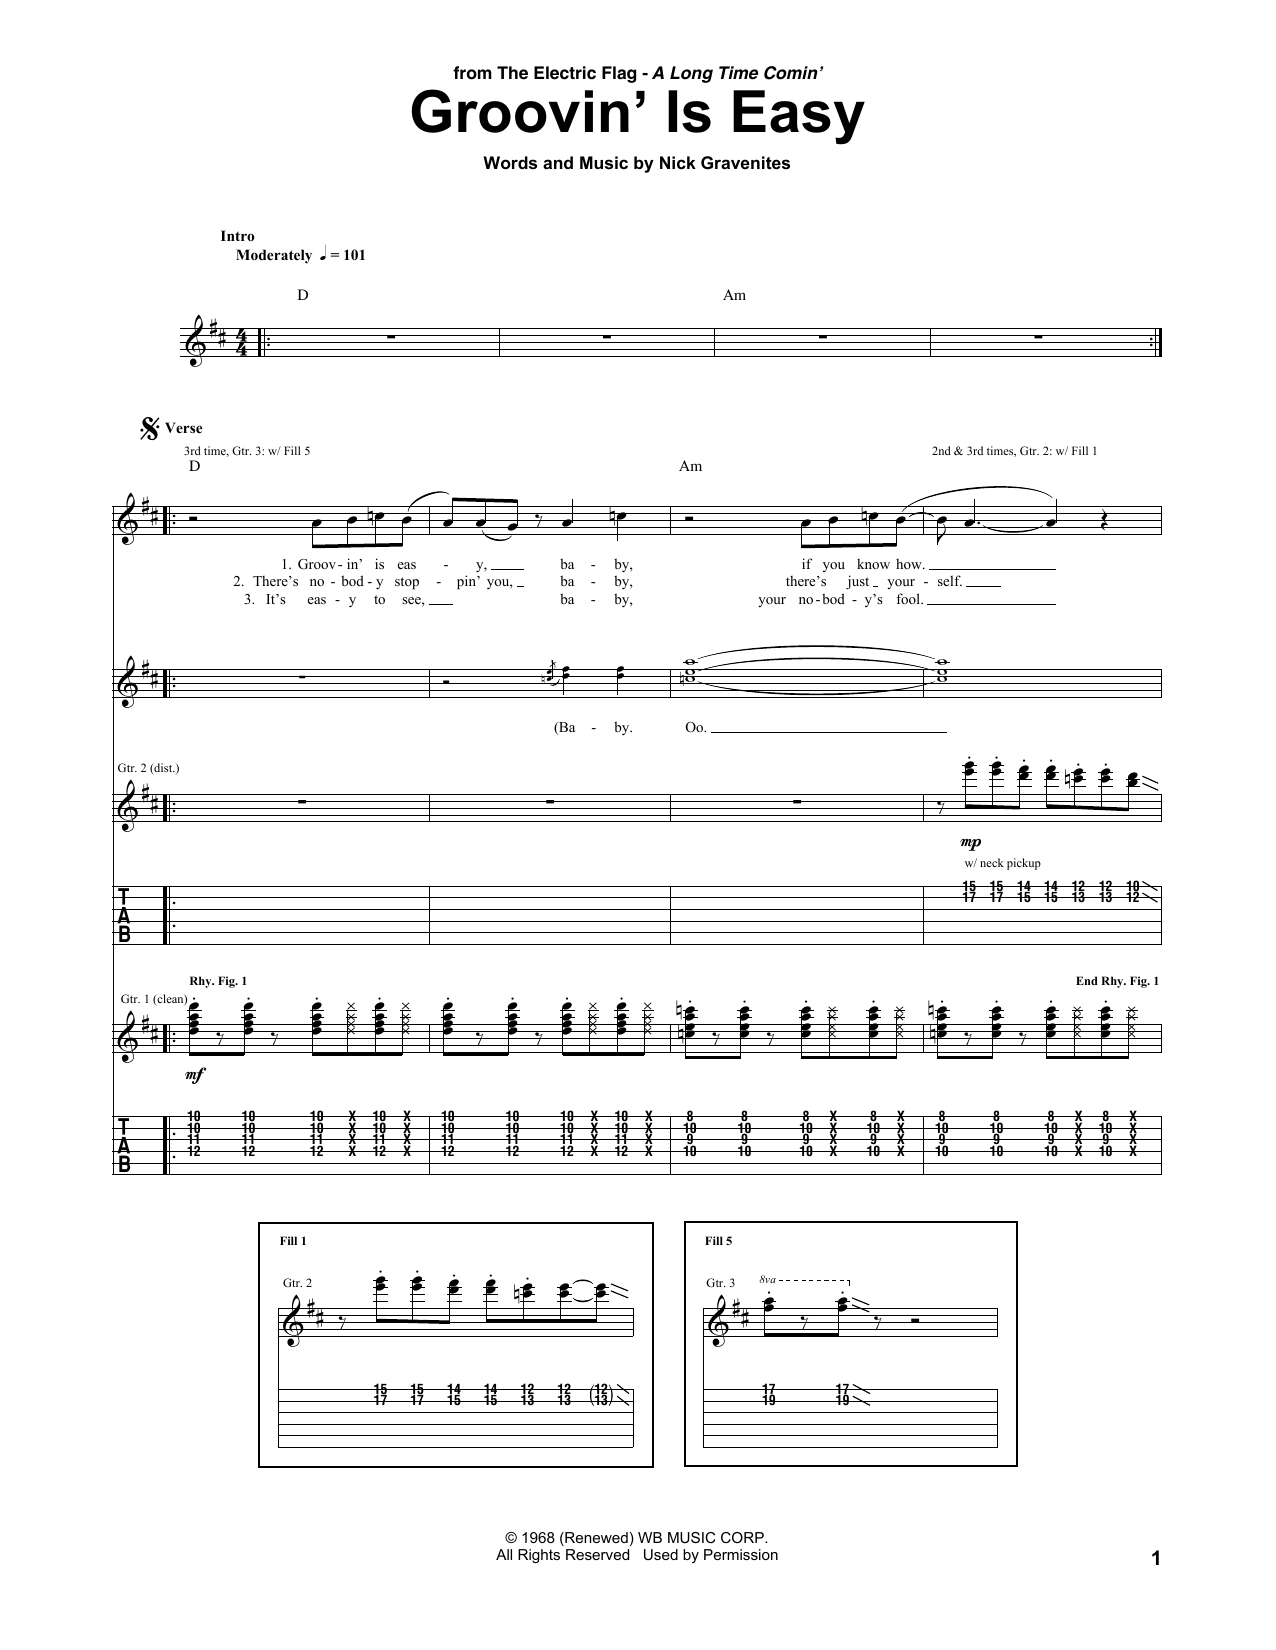 Download The Electric Flag Groovin' Is Easy Sheet Music